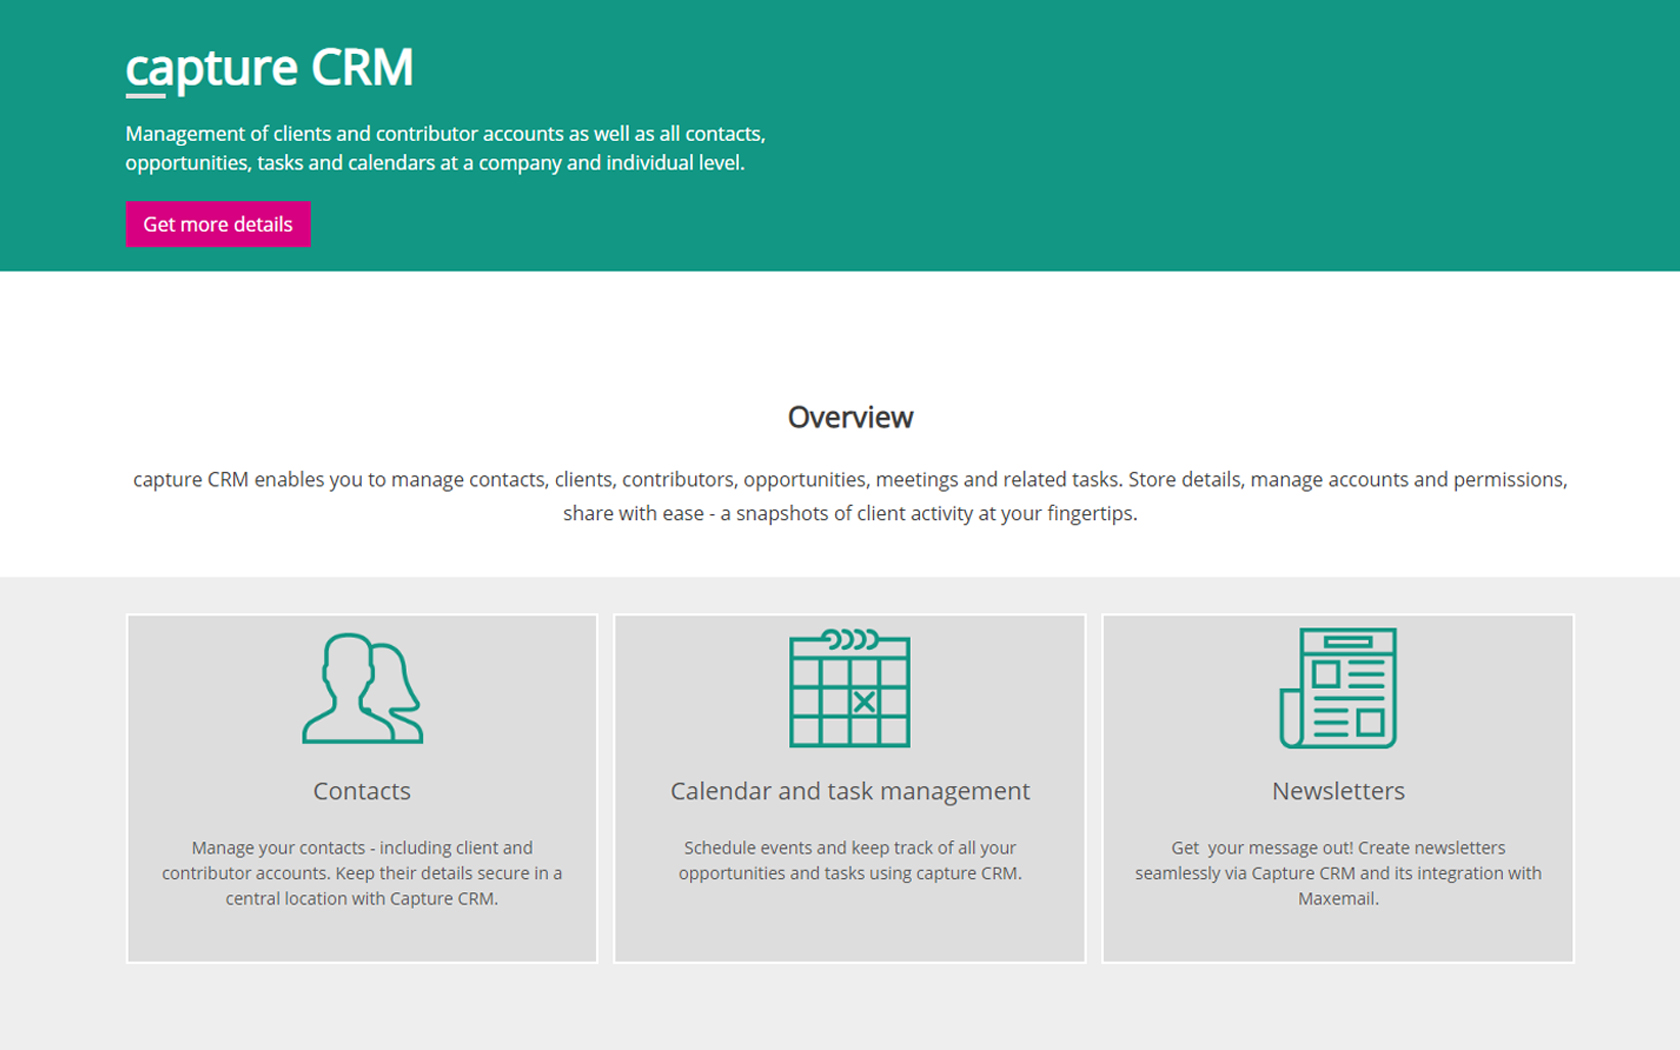 Manage your customer relationships in an effective way with Capture CRM